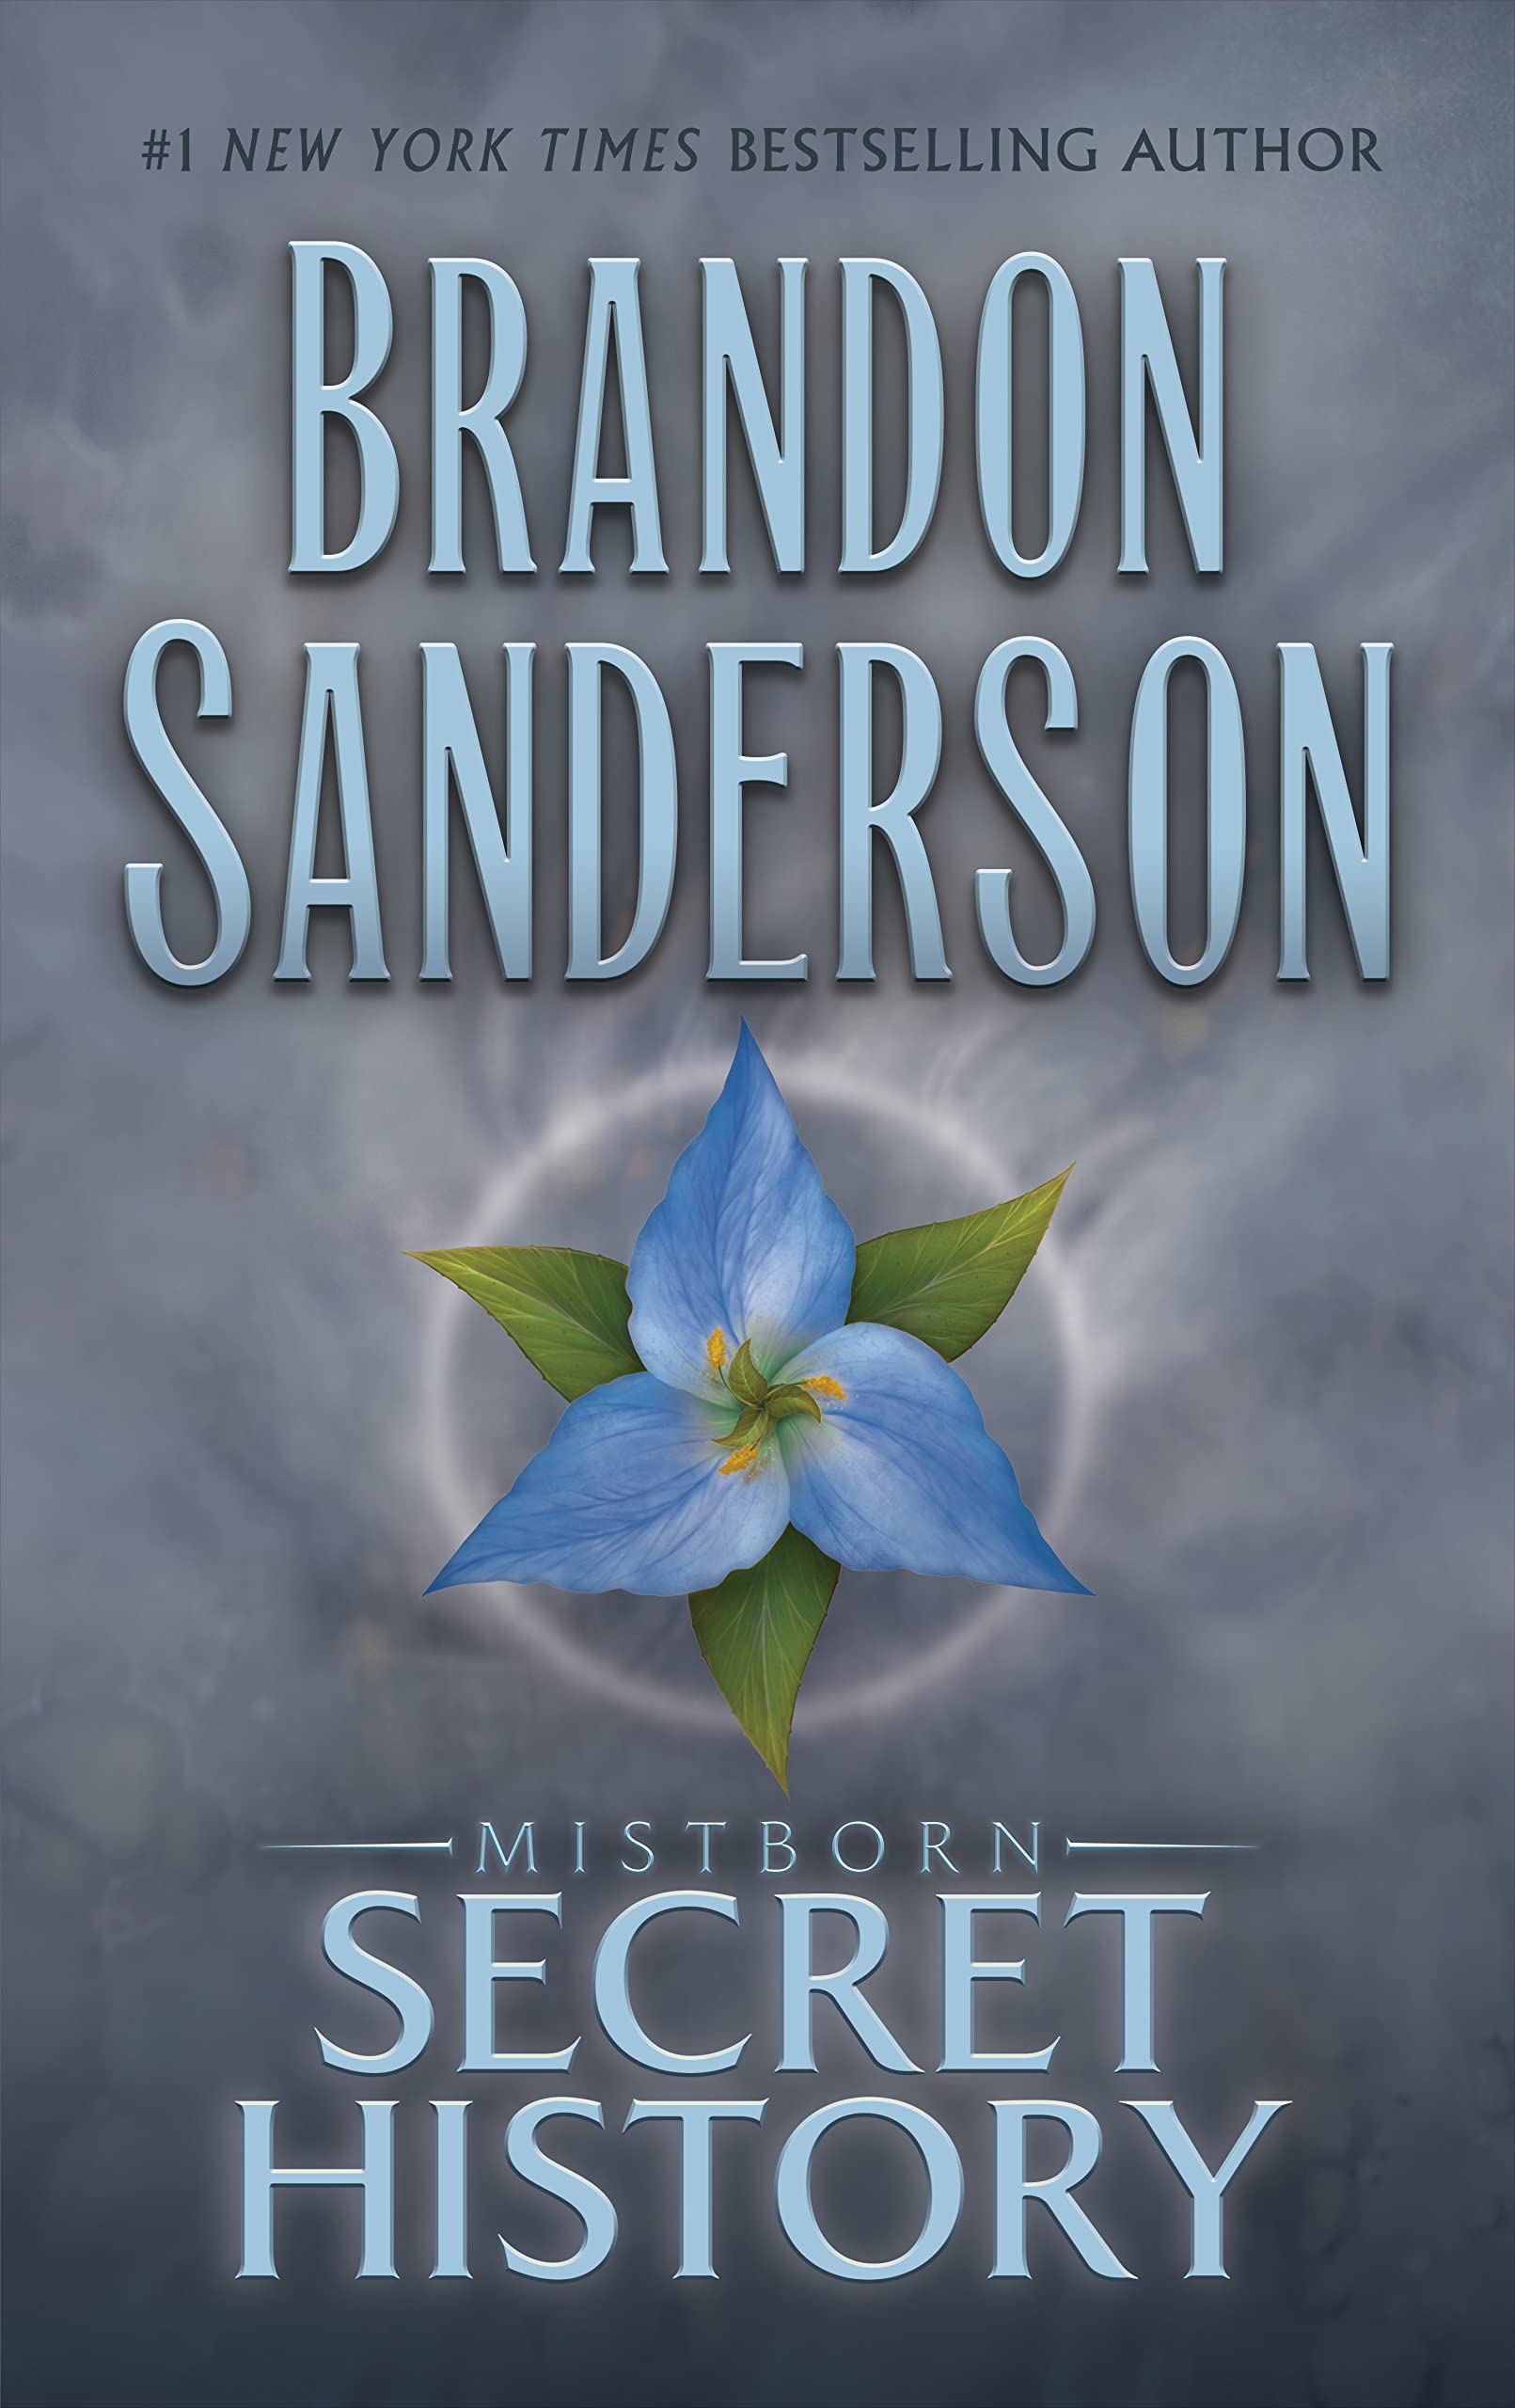 Brandon Sanderson: Why He Isn't Releasing His Books on Audible